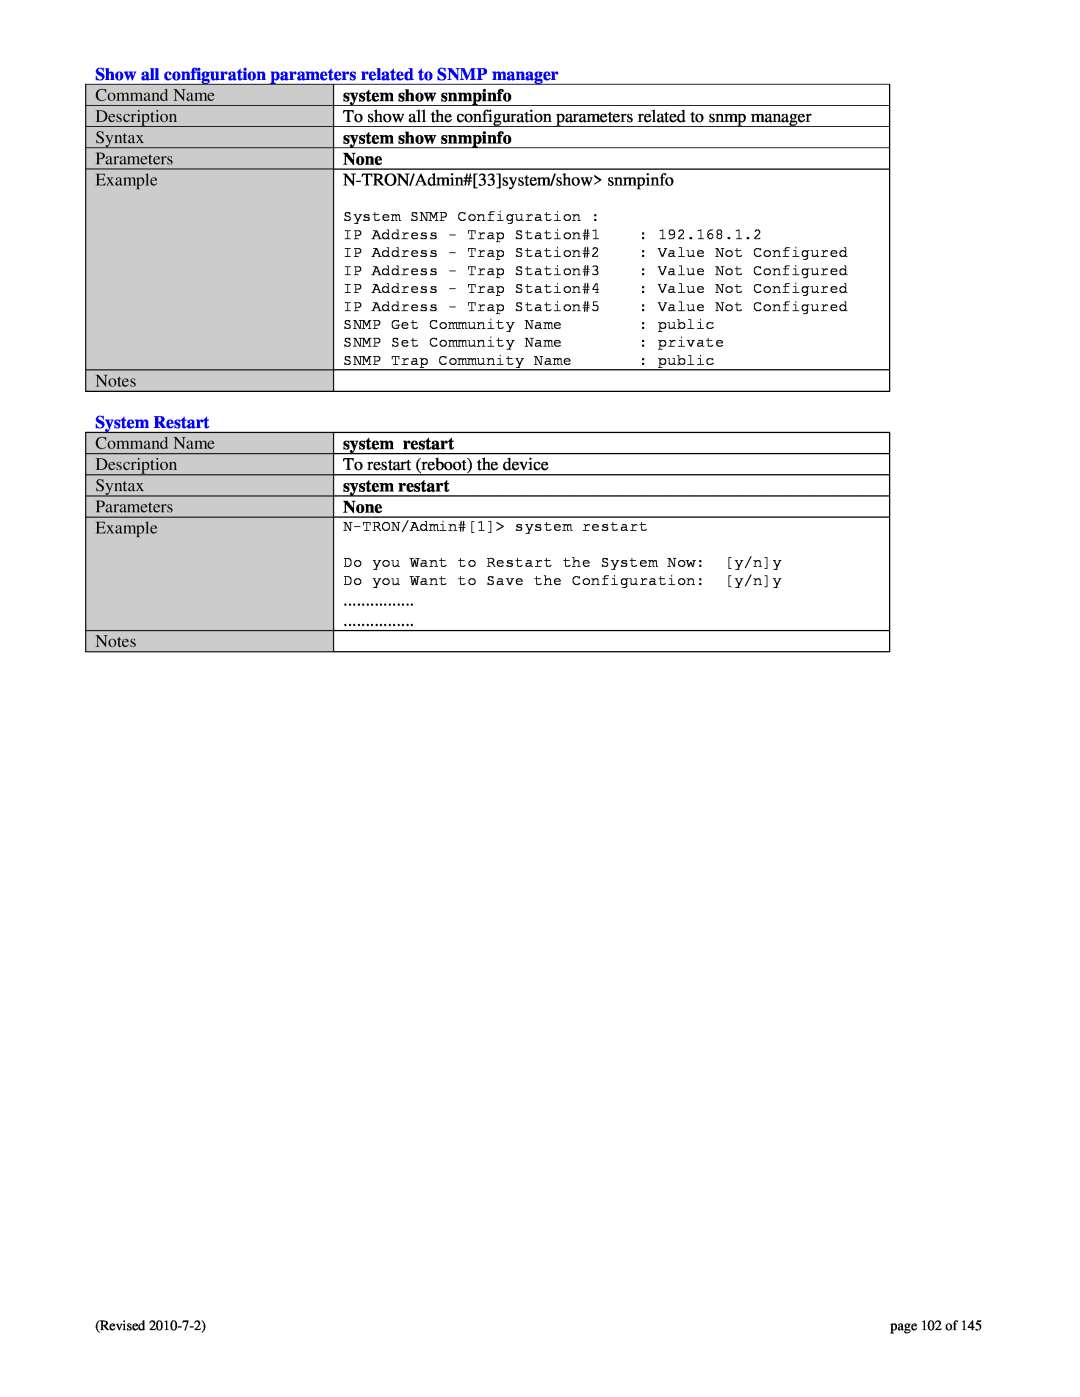 N-Tron 9000 user manual Show all configuration parameters related to SNMP manager, System Restart, page 102 of 